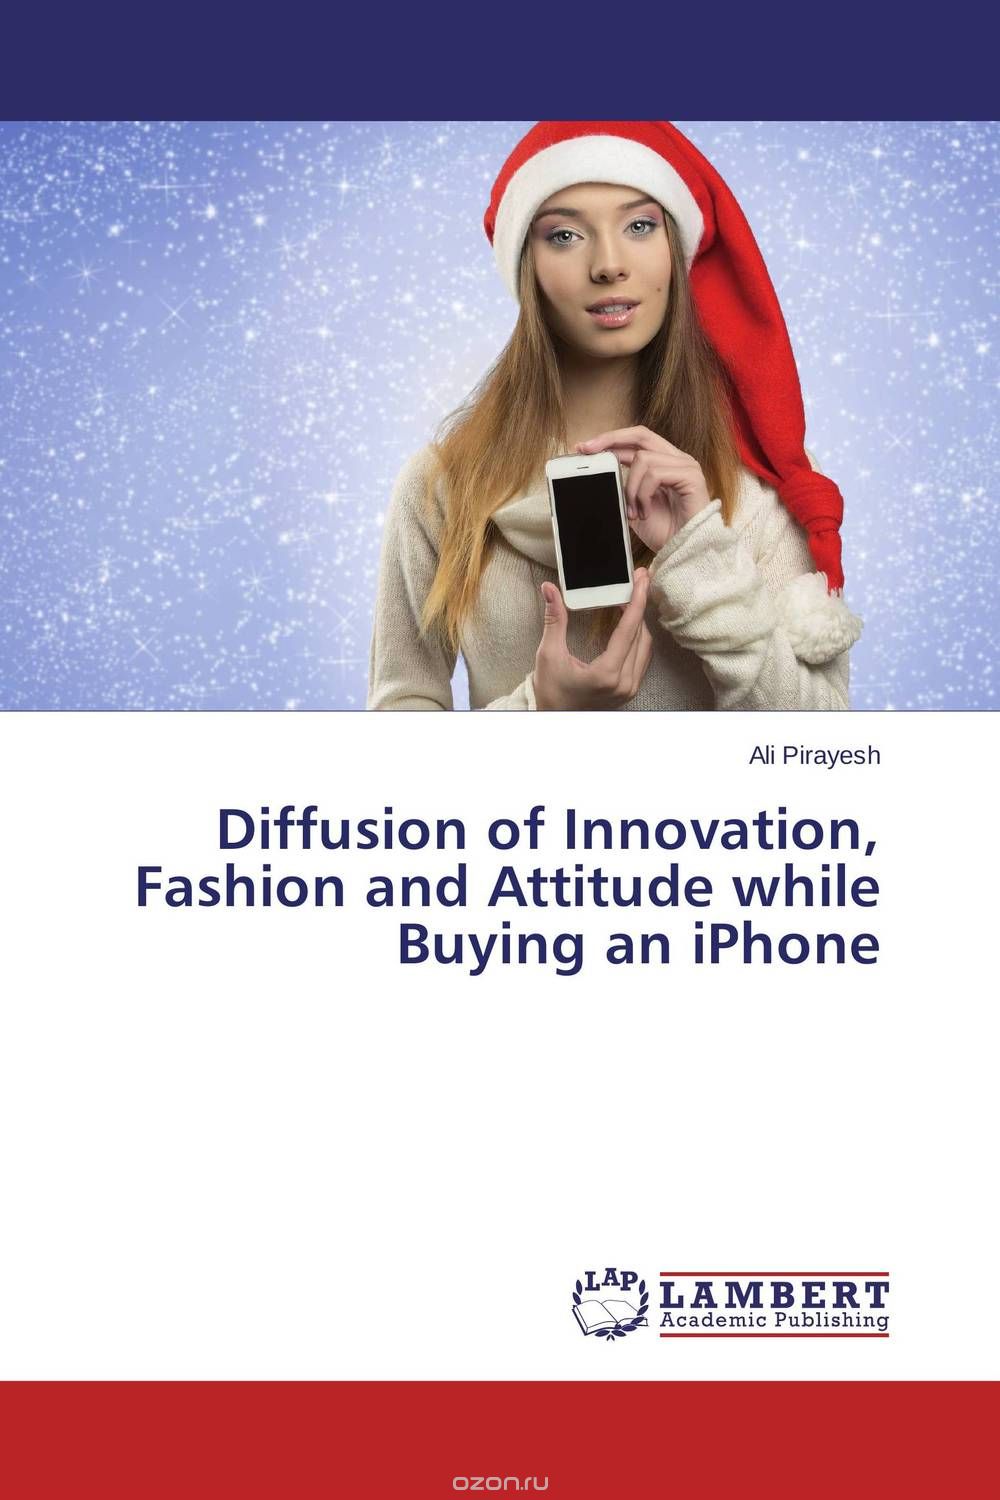 Скачать книгу "Diffusion of Innovation, Fashion and Attitude while Buying an iPhone"